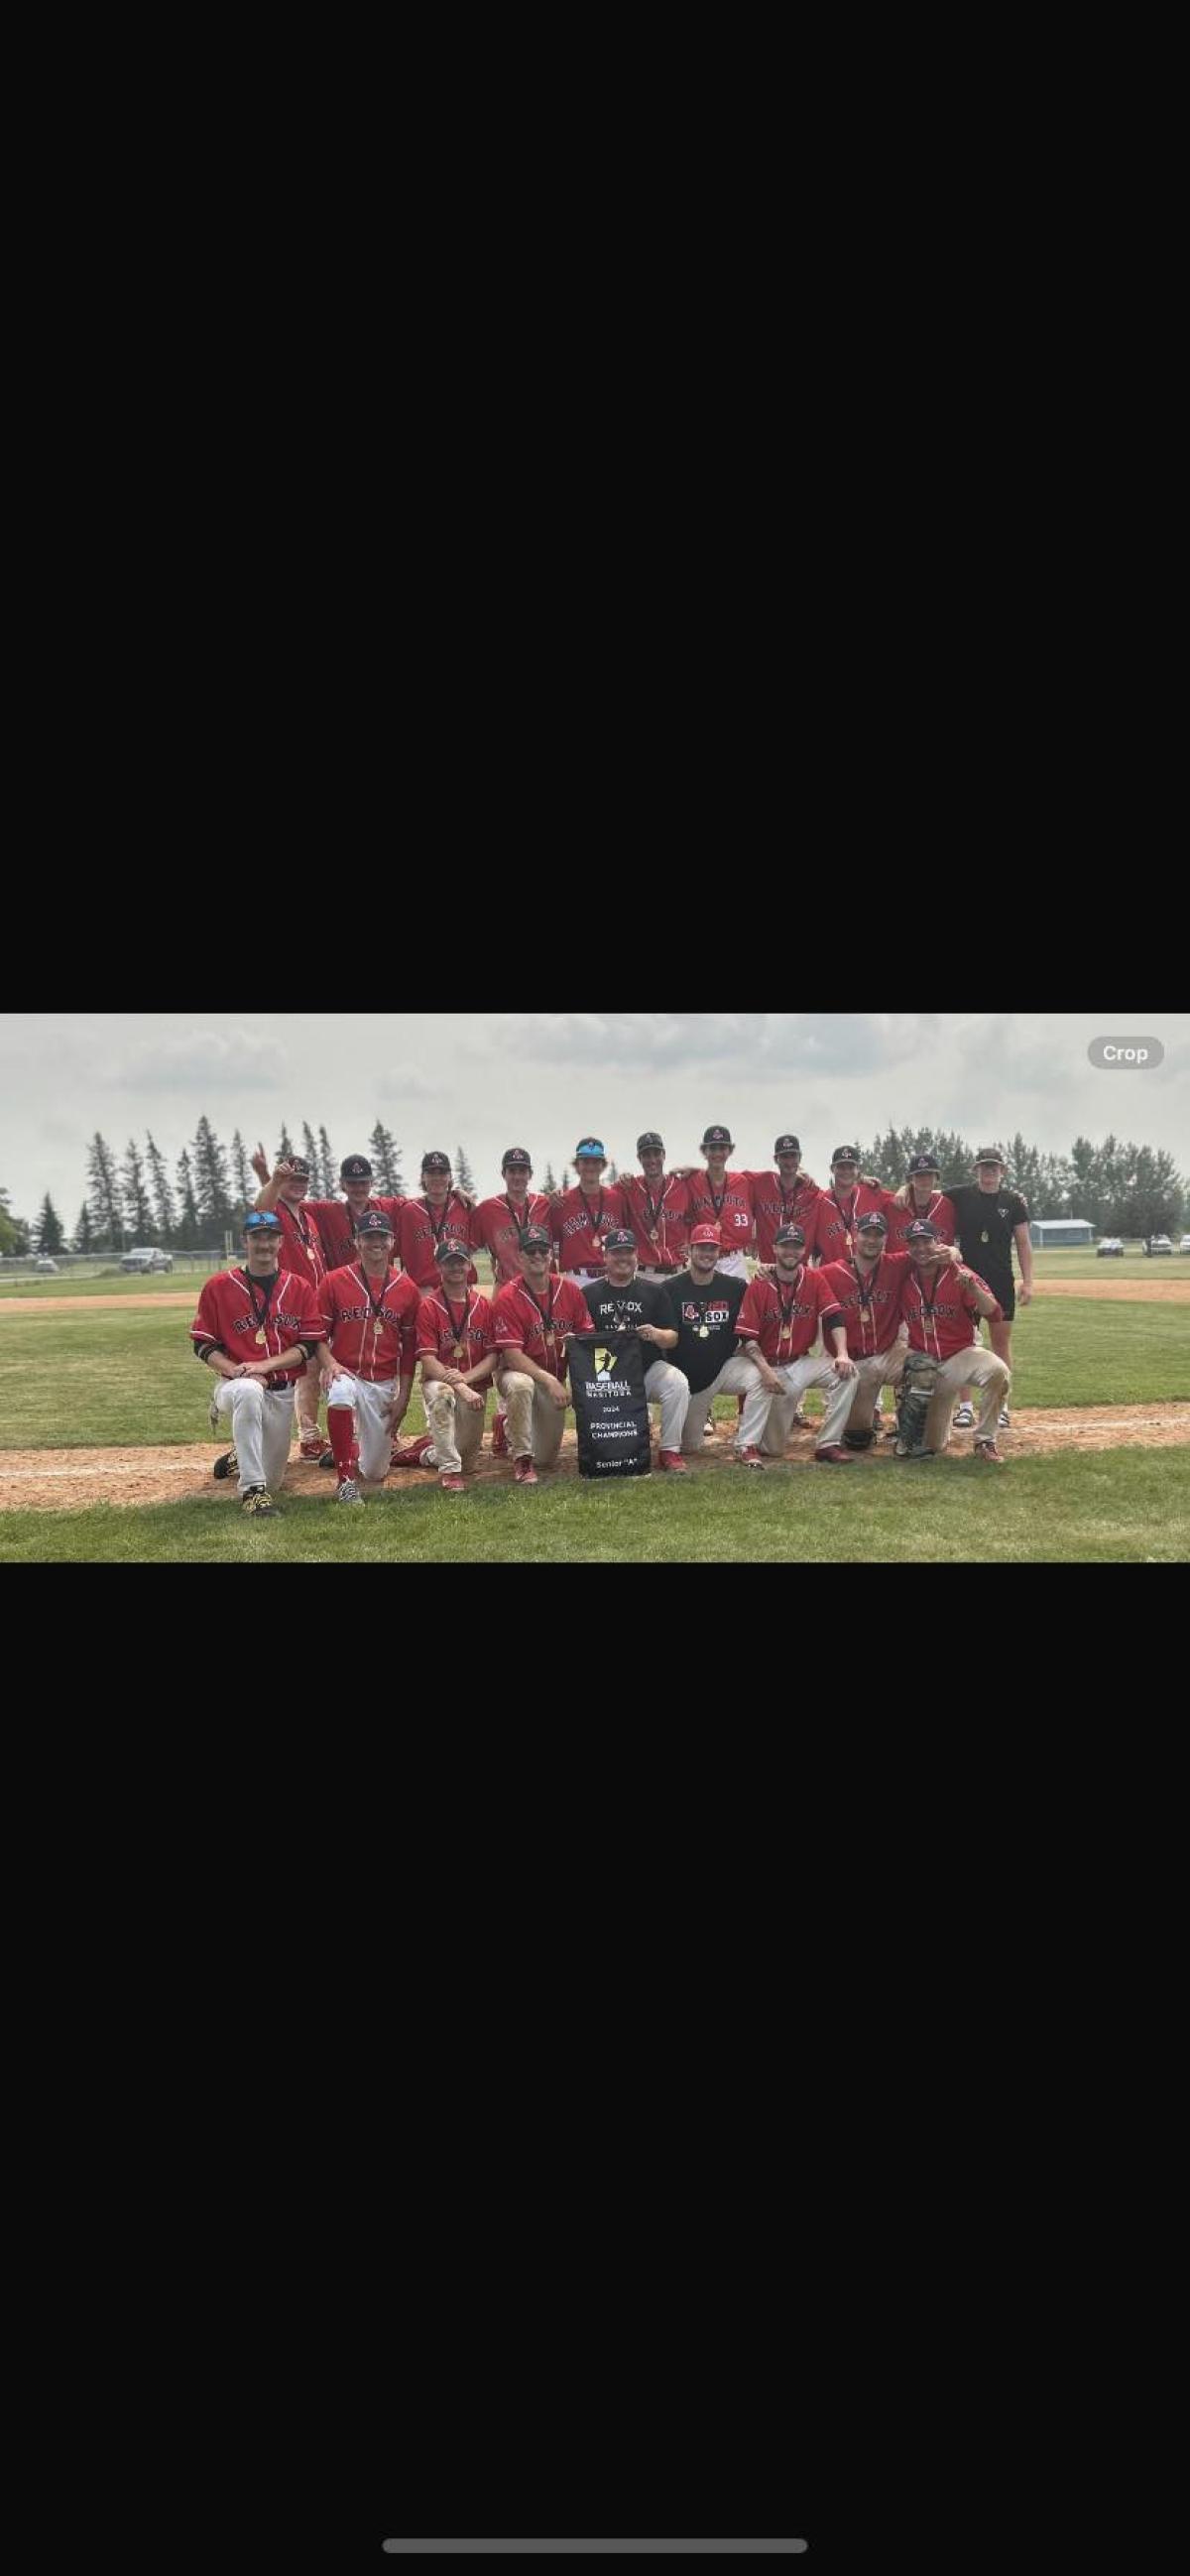 Red Sox Claim Provincial Title